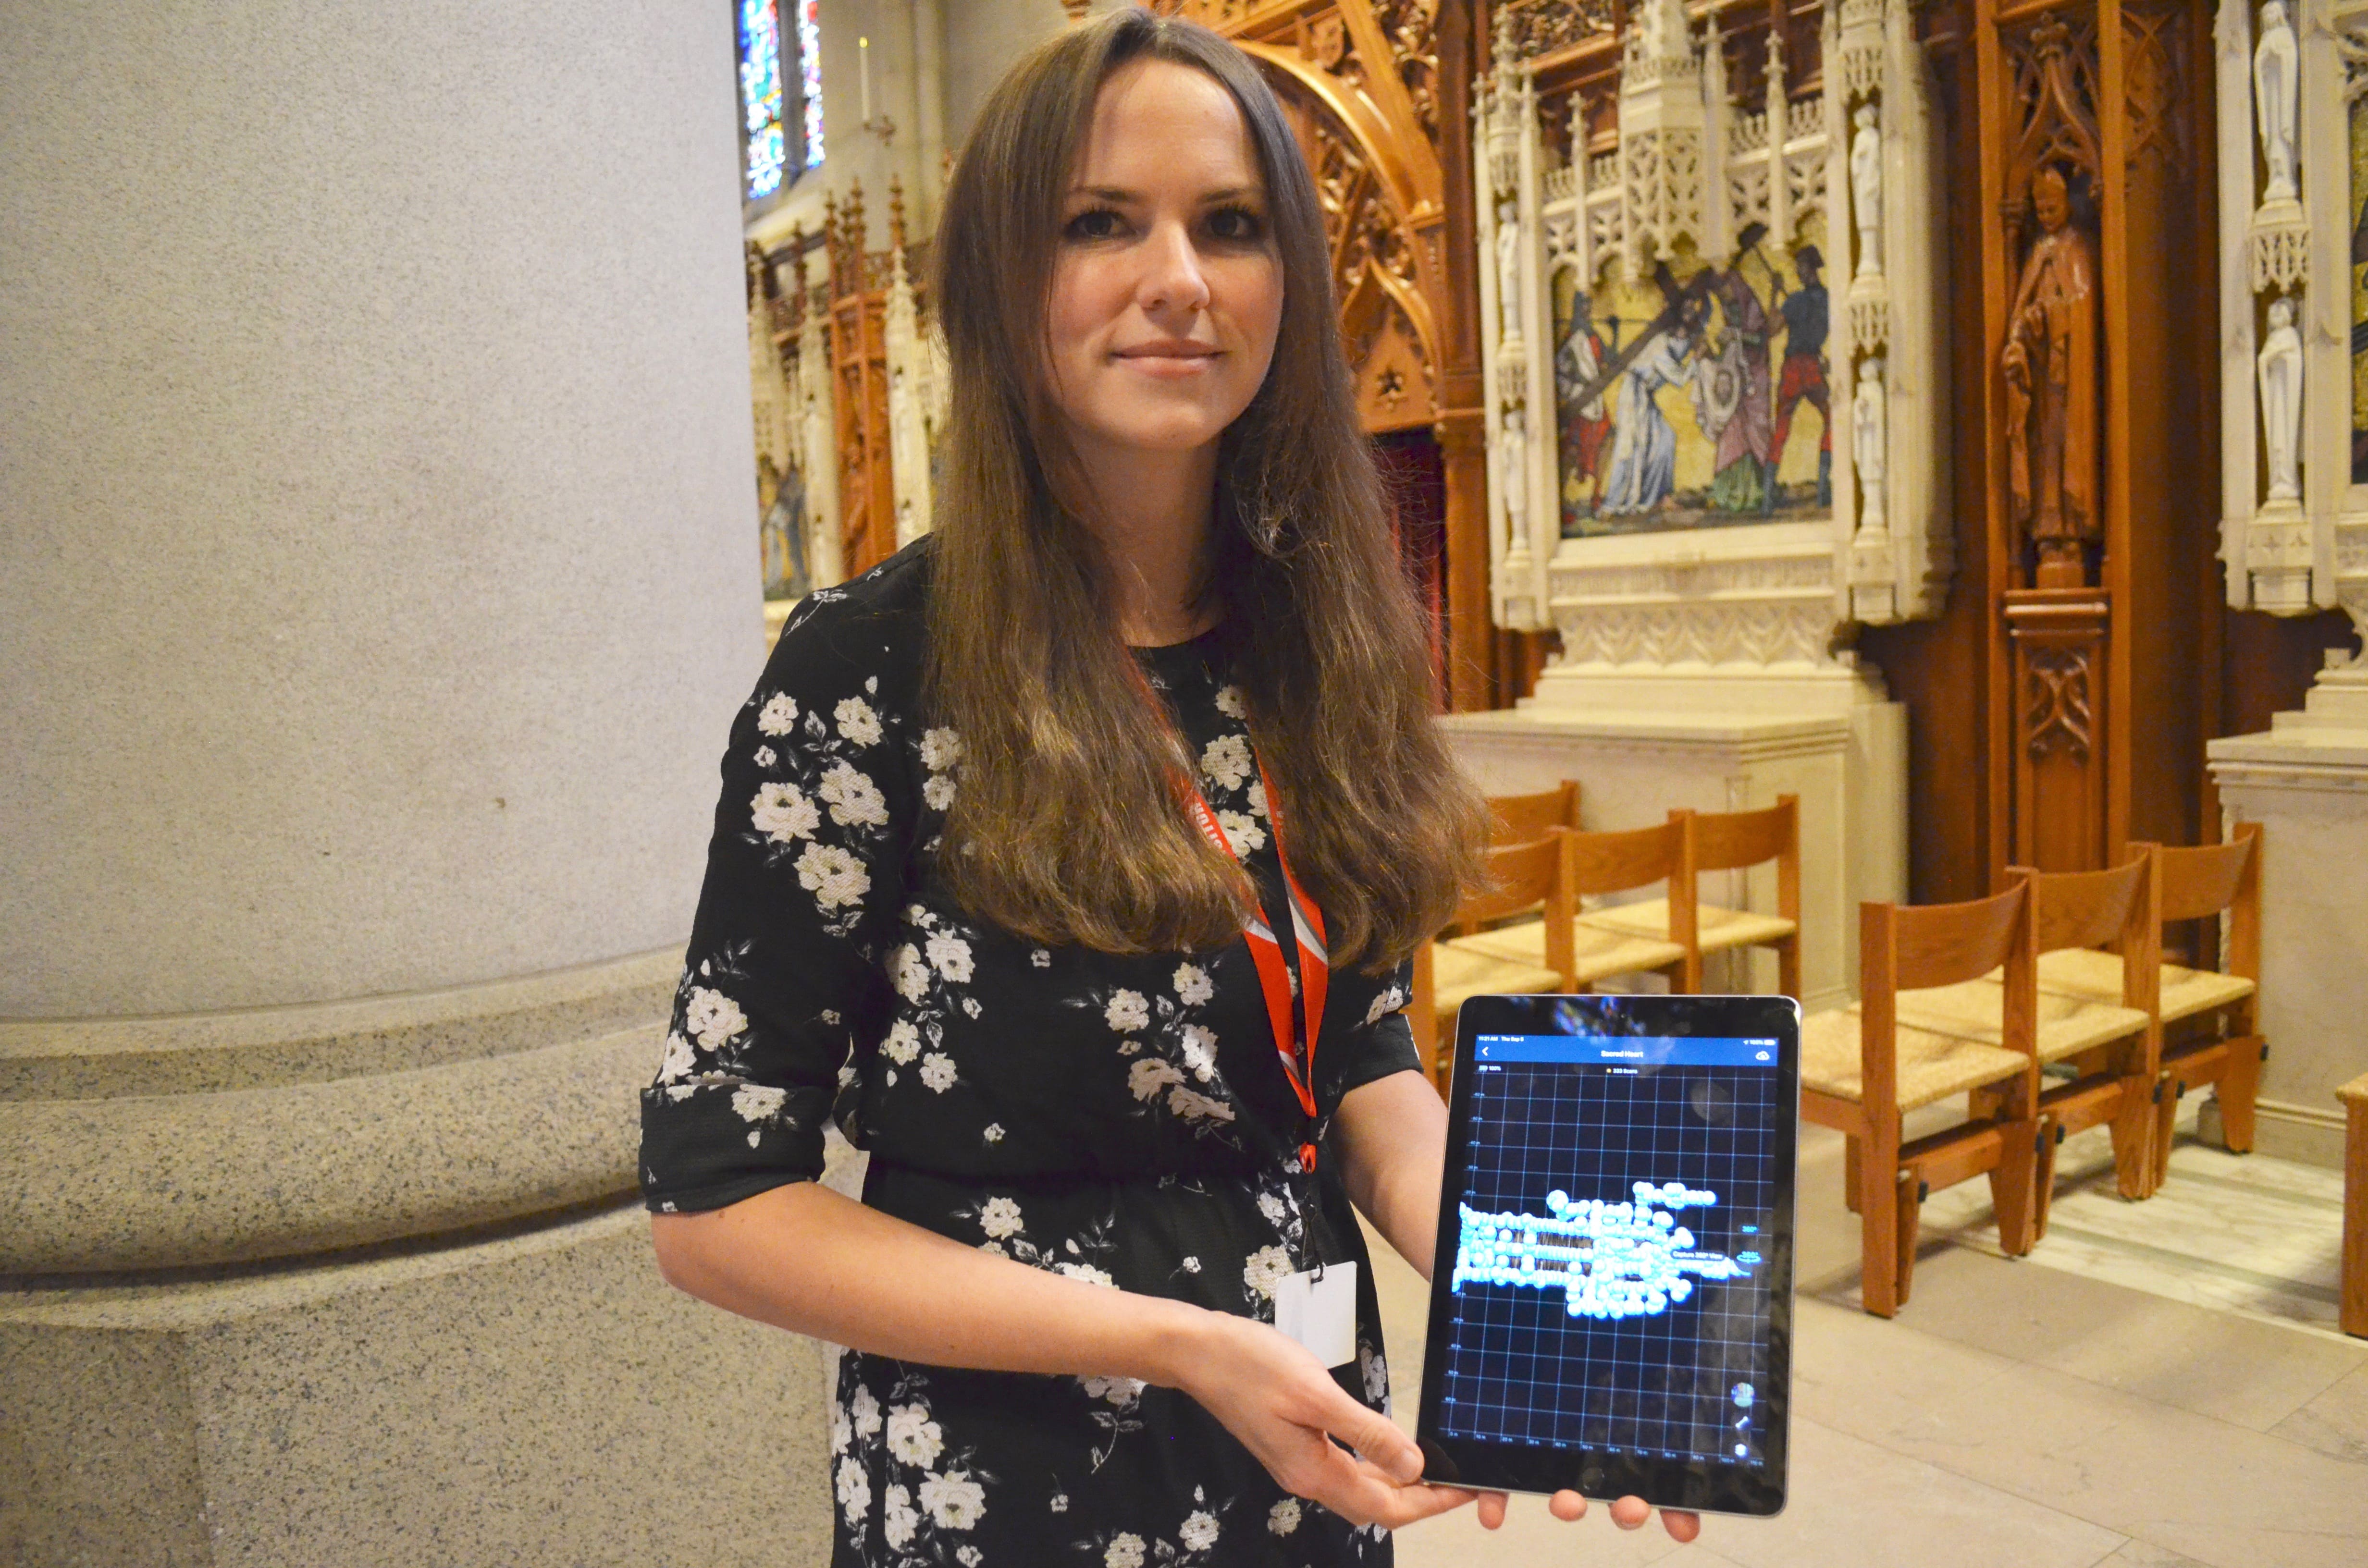 The Newark Archdiocese recently commissioned Amy Giuliano to create a virtual reality tour for the Cathedral Basilica of the Sacred Heart in Newark. (Photo by Kelly Marsicano/Archdiocese of Newark)